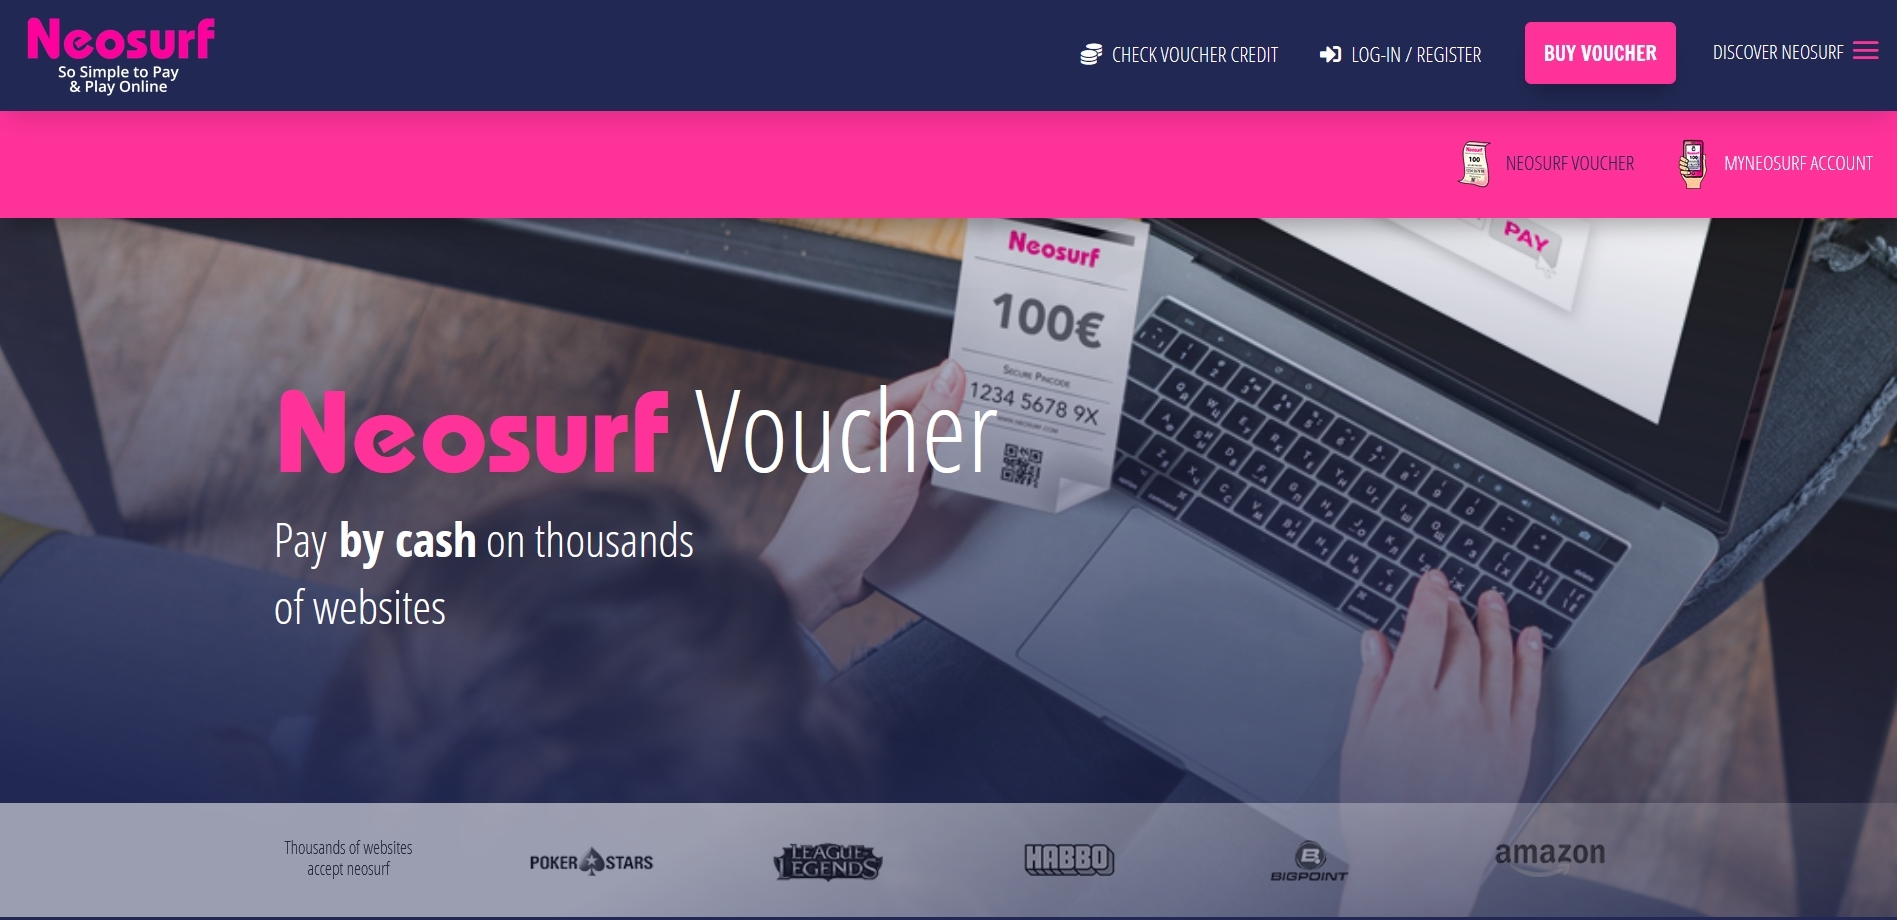 Neosurf €10 Gift Card BE